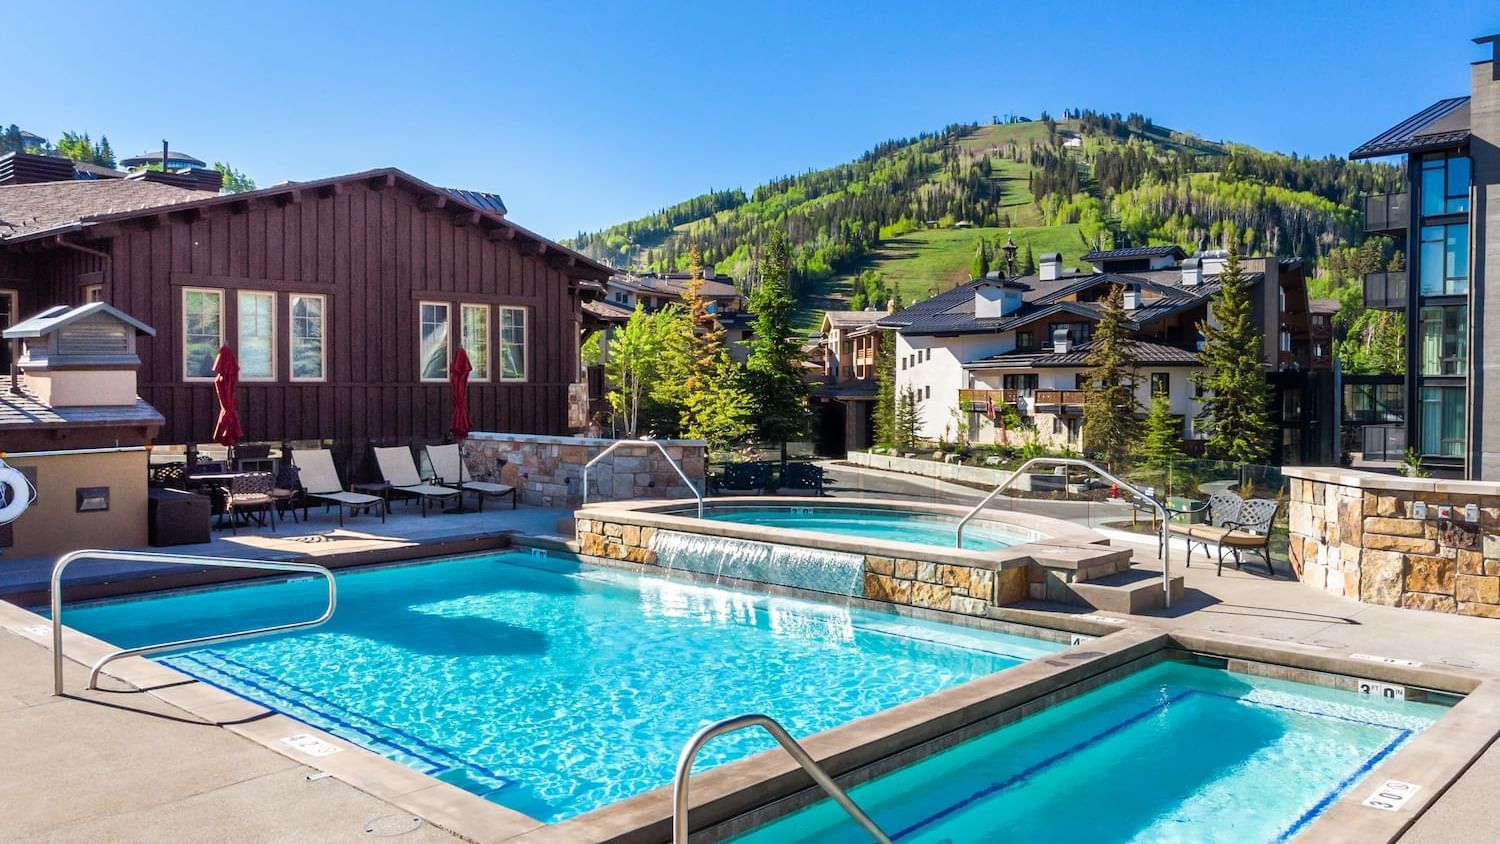 Heated Pools with Hot tub arranged with loungers at Chateaux Deer Valley